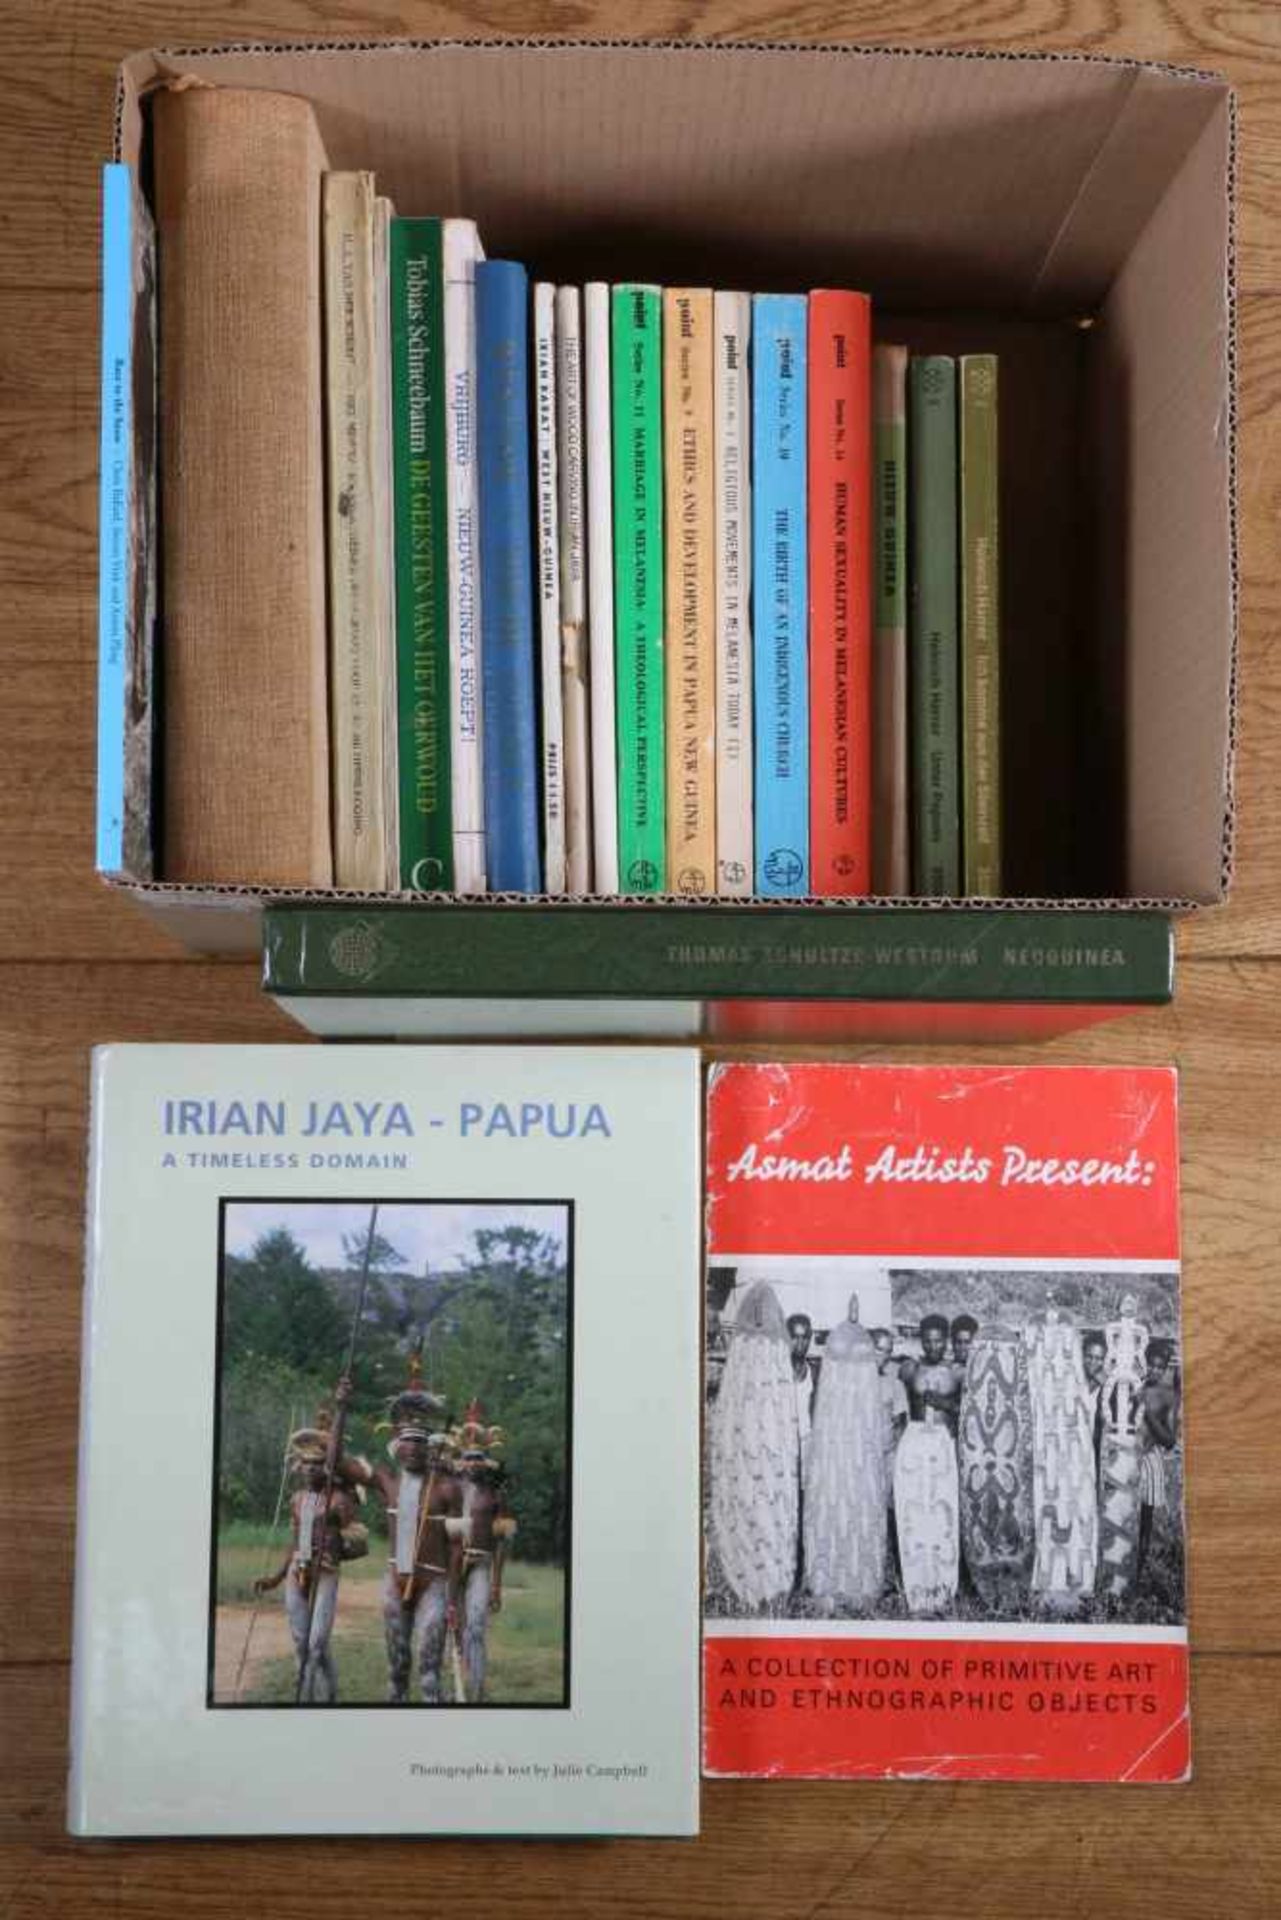 Several books concerning arts of Papua, [ds]0